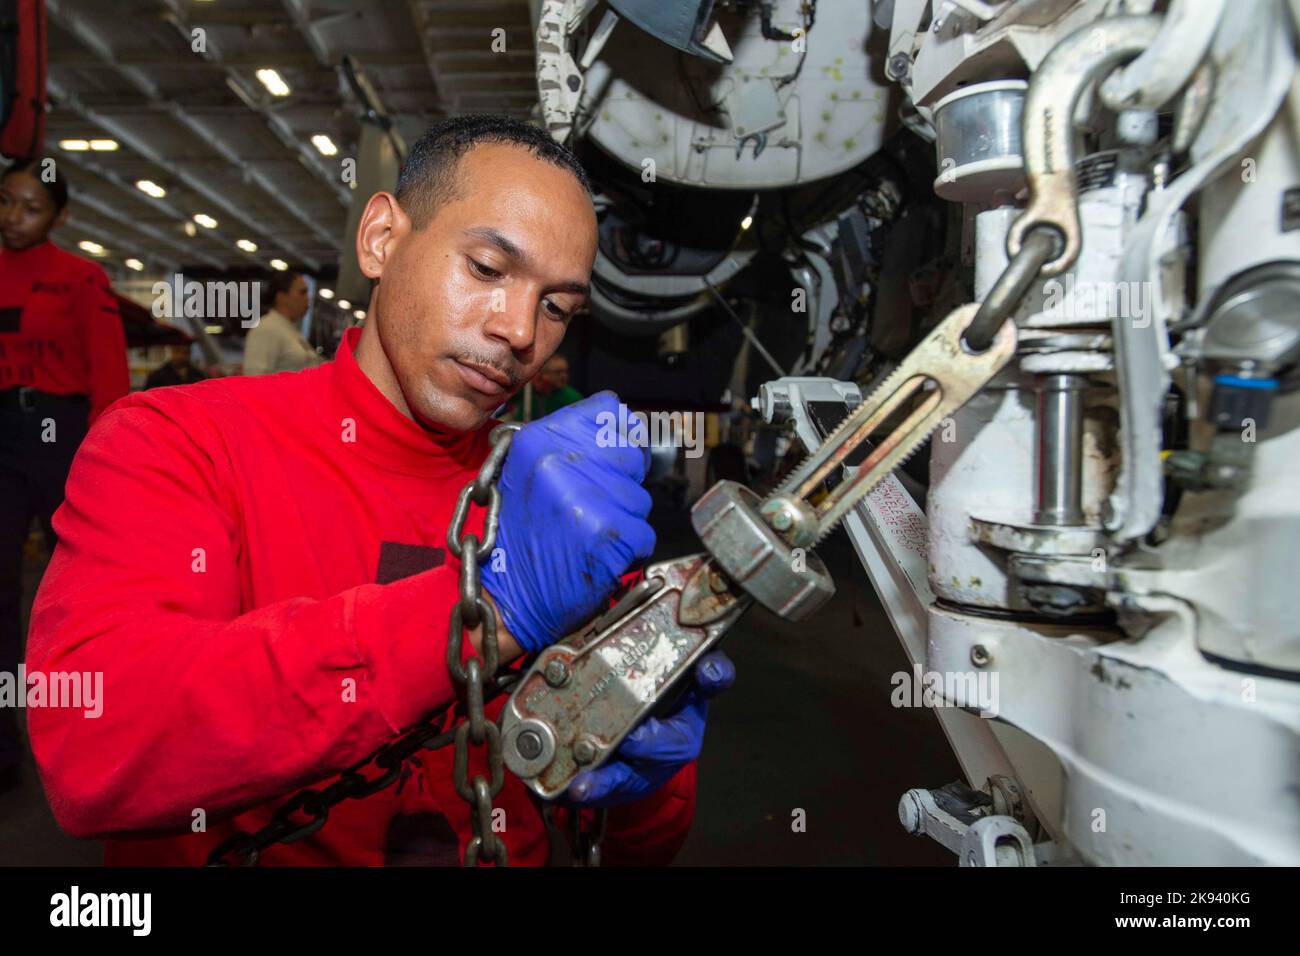 Pacific Ocean. 3rd Oct, 2022. U.S. Navy Aviation Ordnanceman 3rd Class Kevin Cross, from Los Angeles, removes chains from an F/A-18E Super Hornet, from the 'Mighty Shrikes' of Strike Fighter Squadron (VFA) 94, in the hangar bay aboard the aircraft carrier USS Nimitz (CVN 68). Nimitz Carrier Strike Group is underway preparing for an upcoming deployment. Credit: U.S. Navy/ZUMA Press Wire Service/ZUMAPRESS.com/Alamy Live News Stock Photo